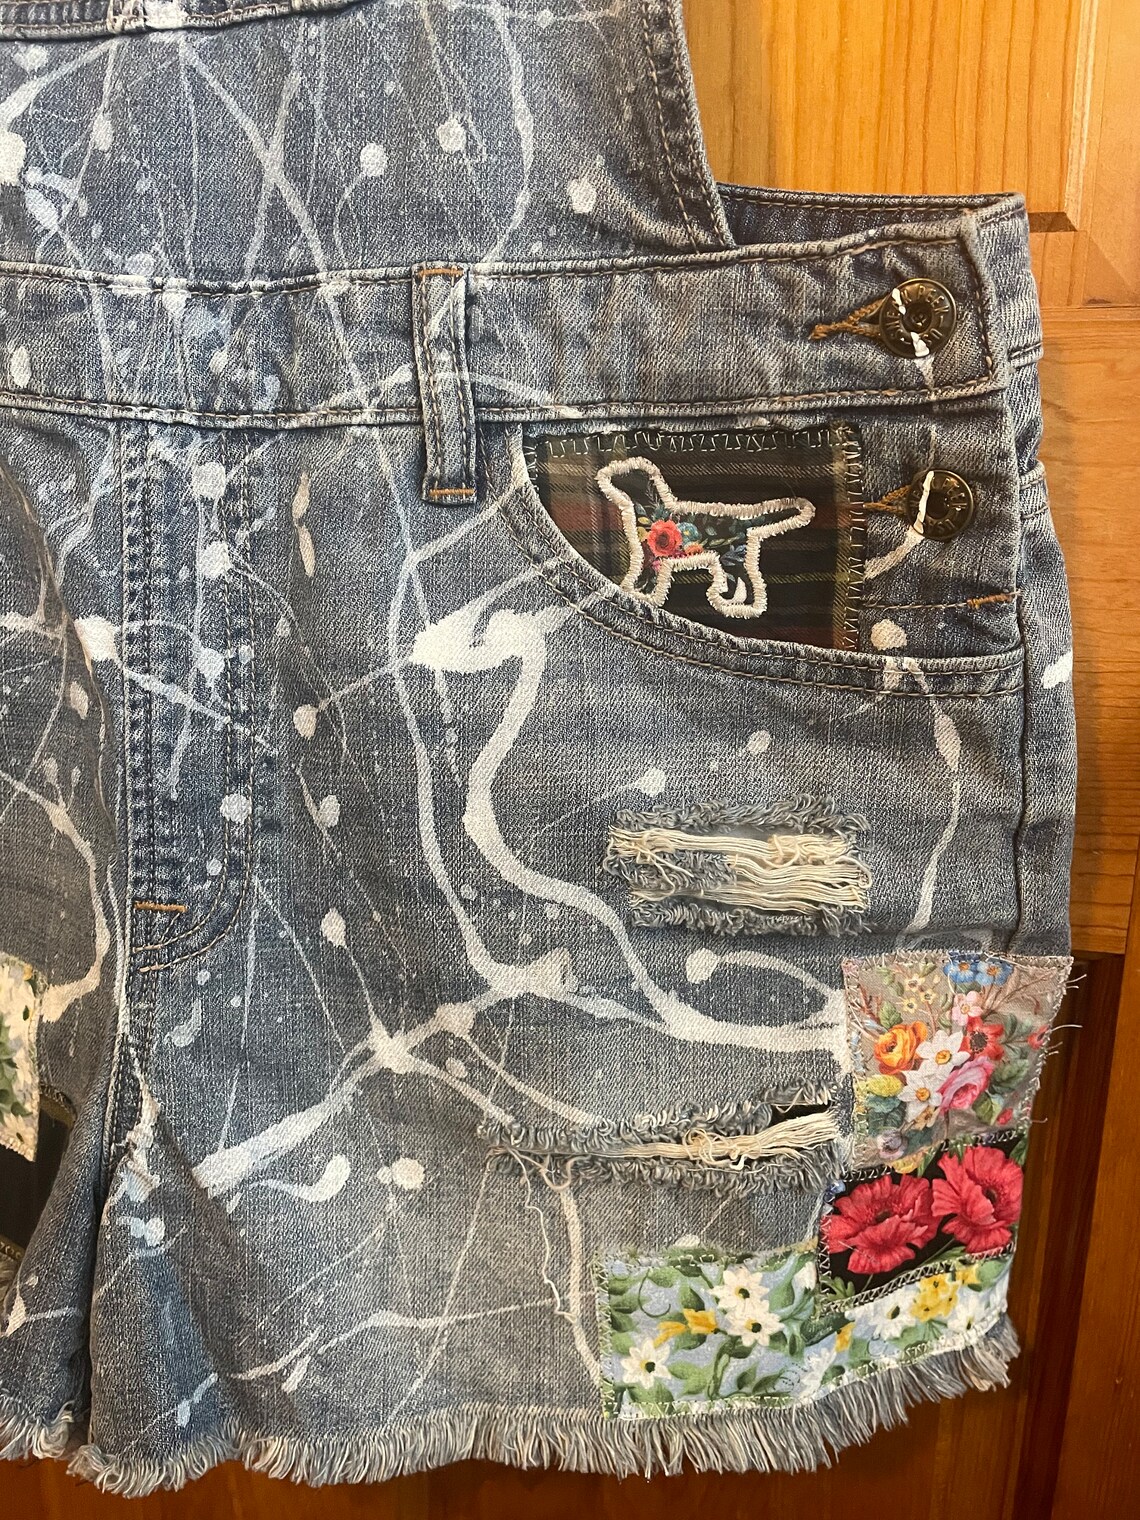 Upcycled Paint Splattered Patched Overalls / Painted Denim - Etsy